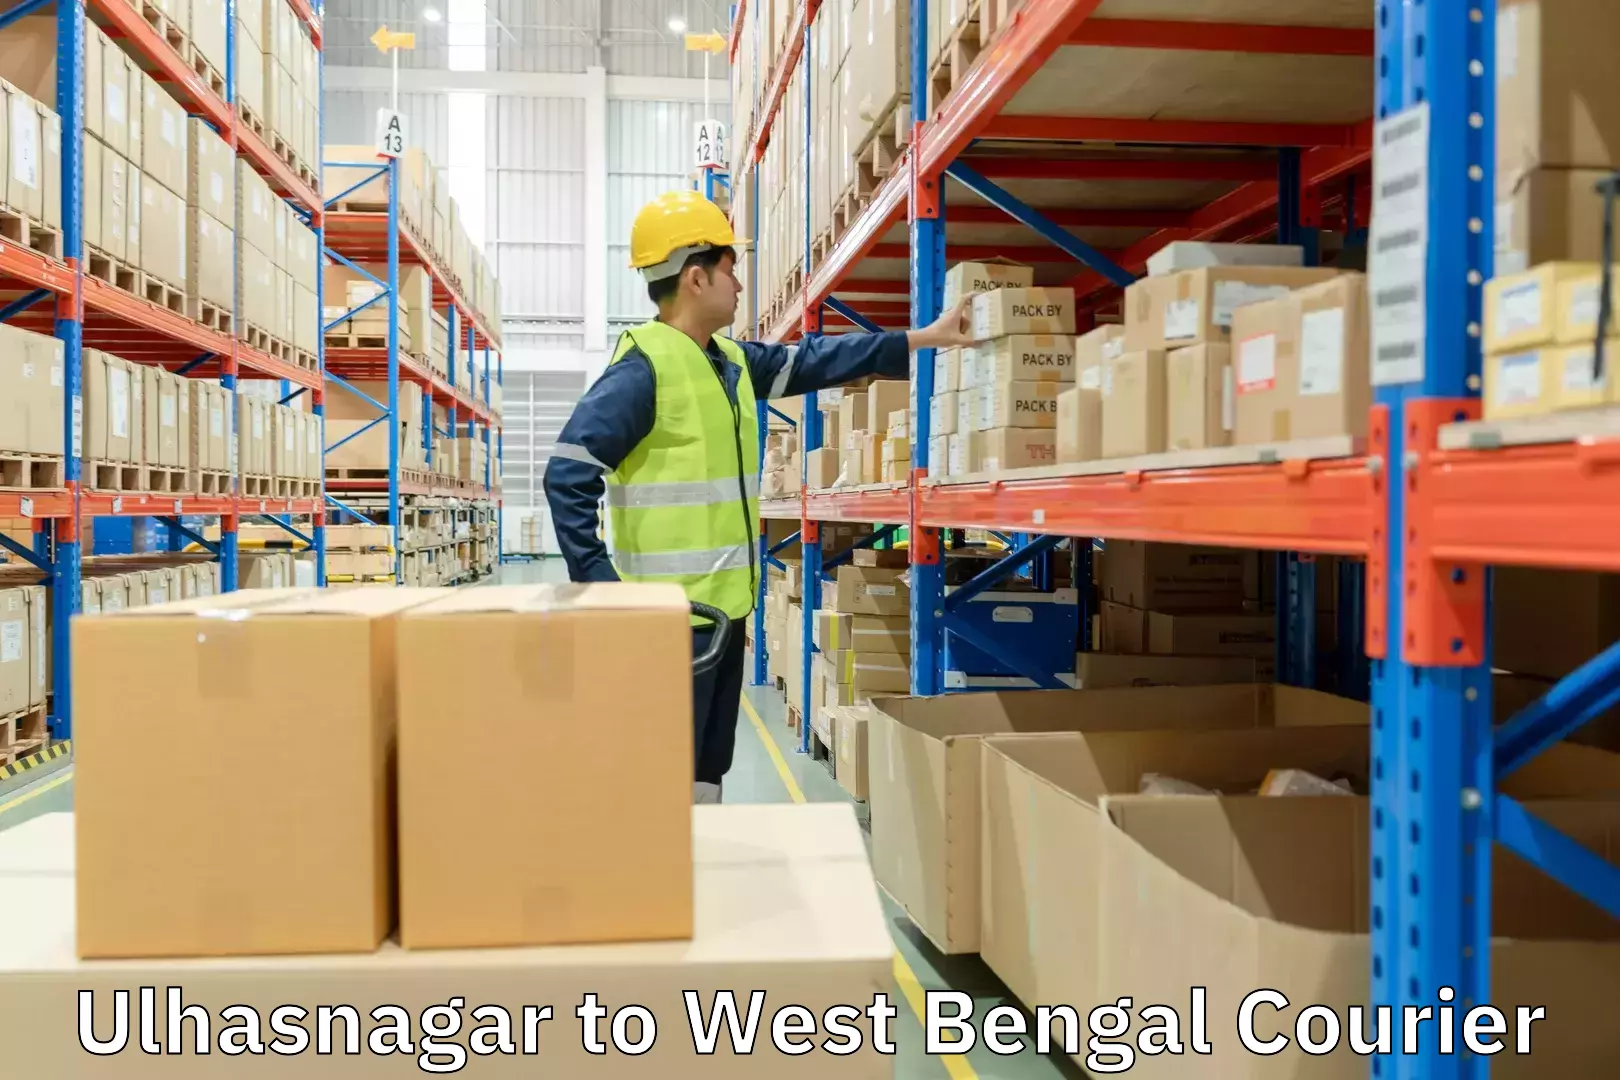 Expedited shipping methods Ulhasnagar to West Bengal